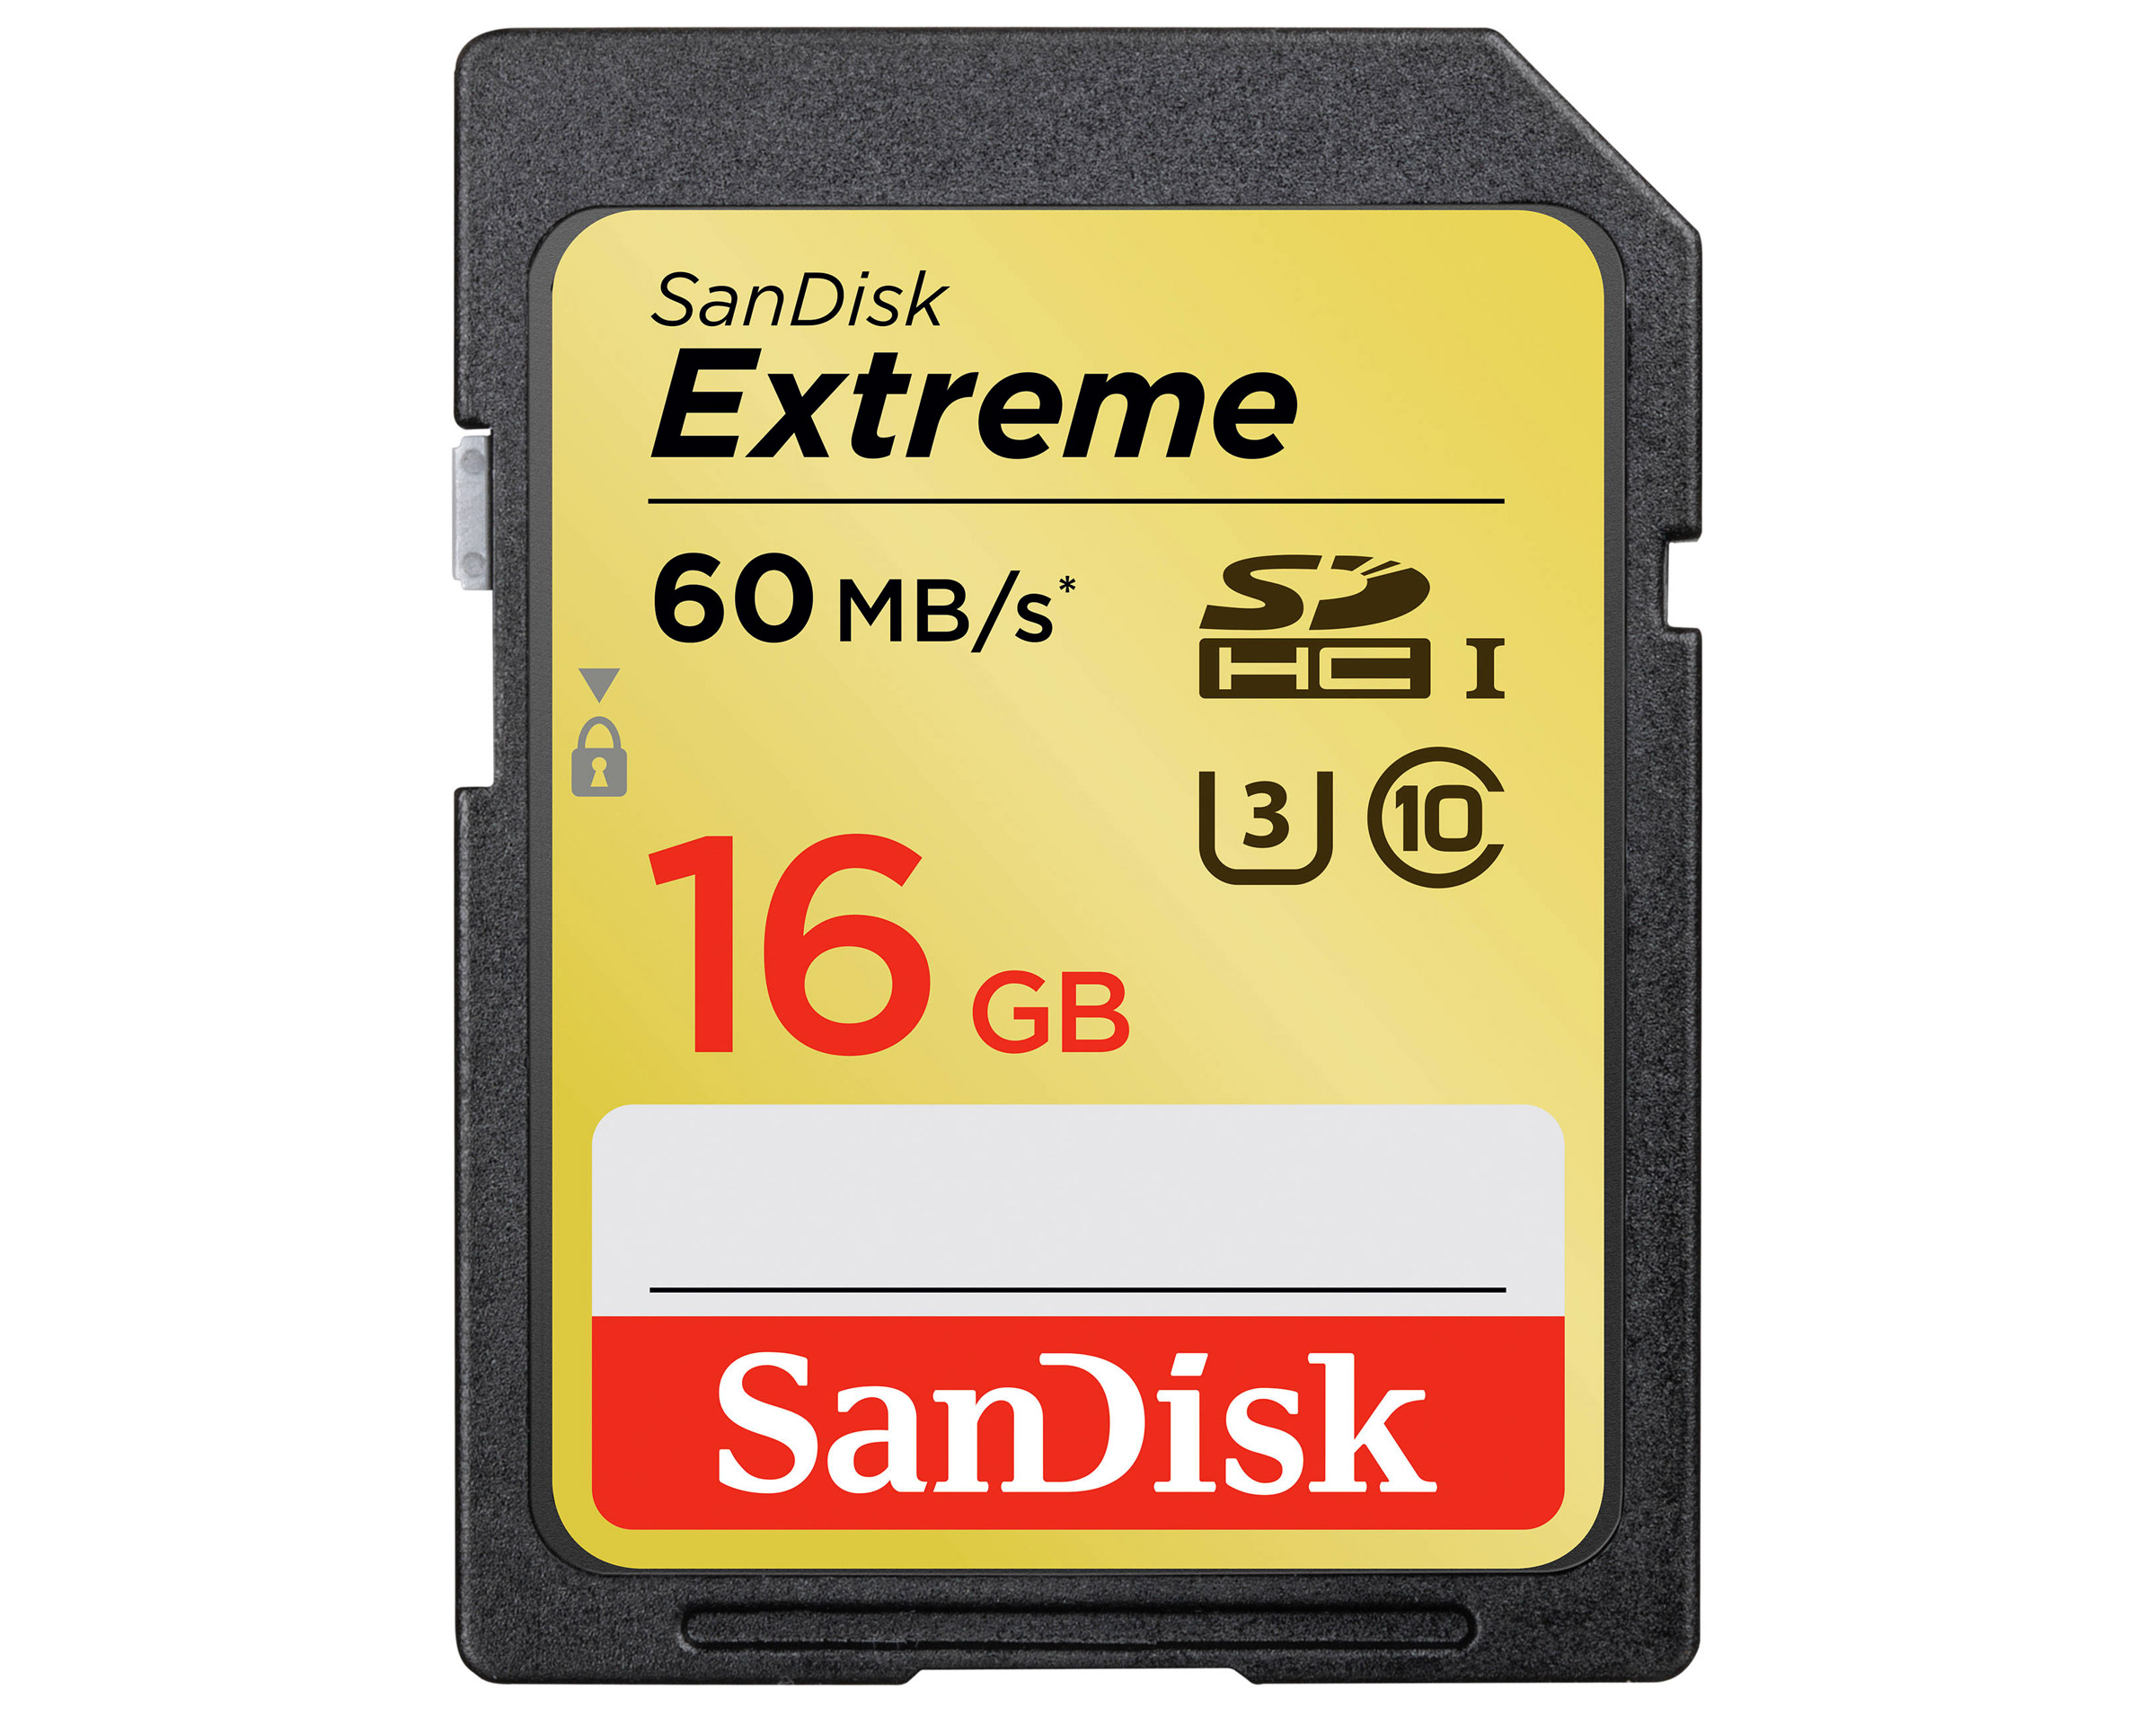 Sandisk Extreme SDHC 16 GB (60 MB/s)